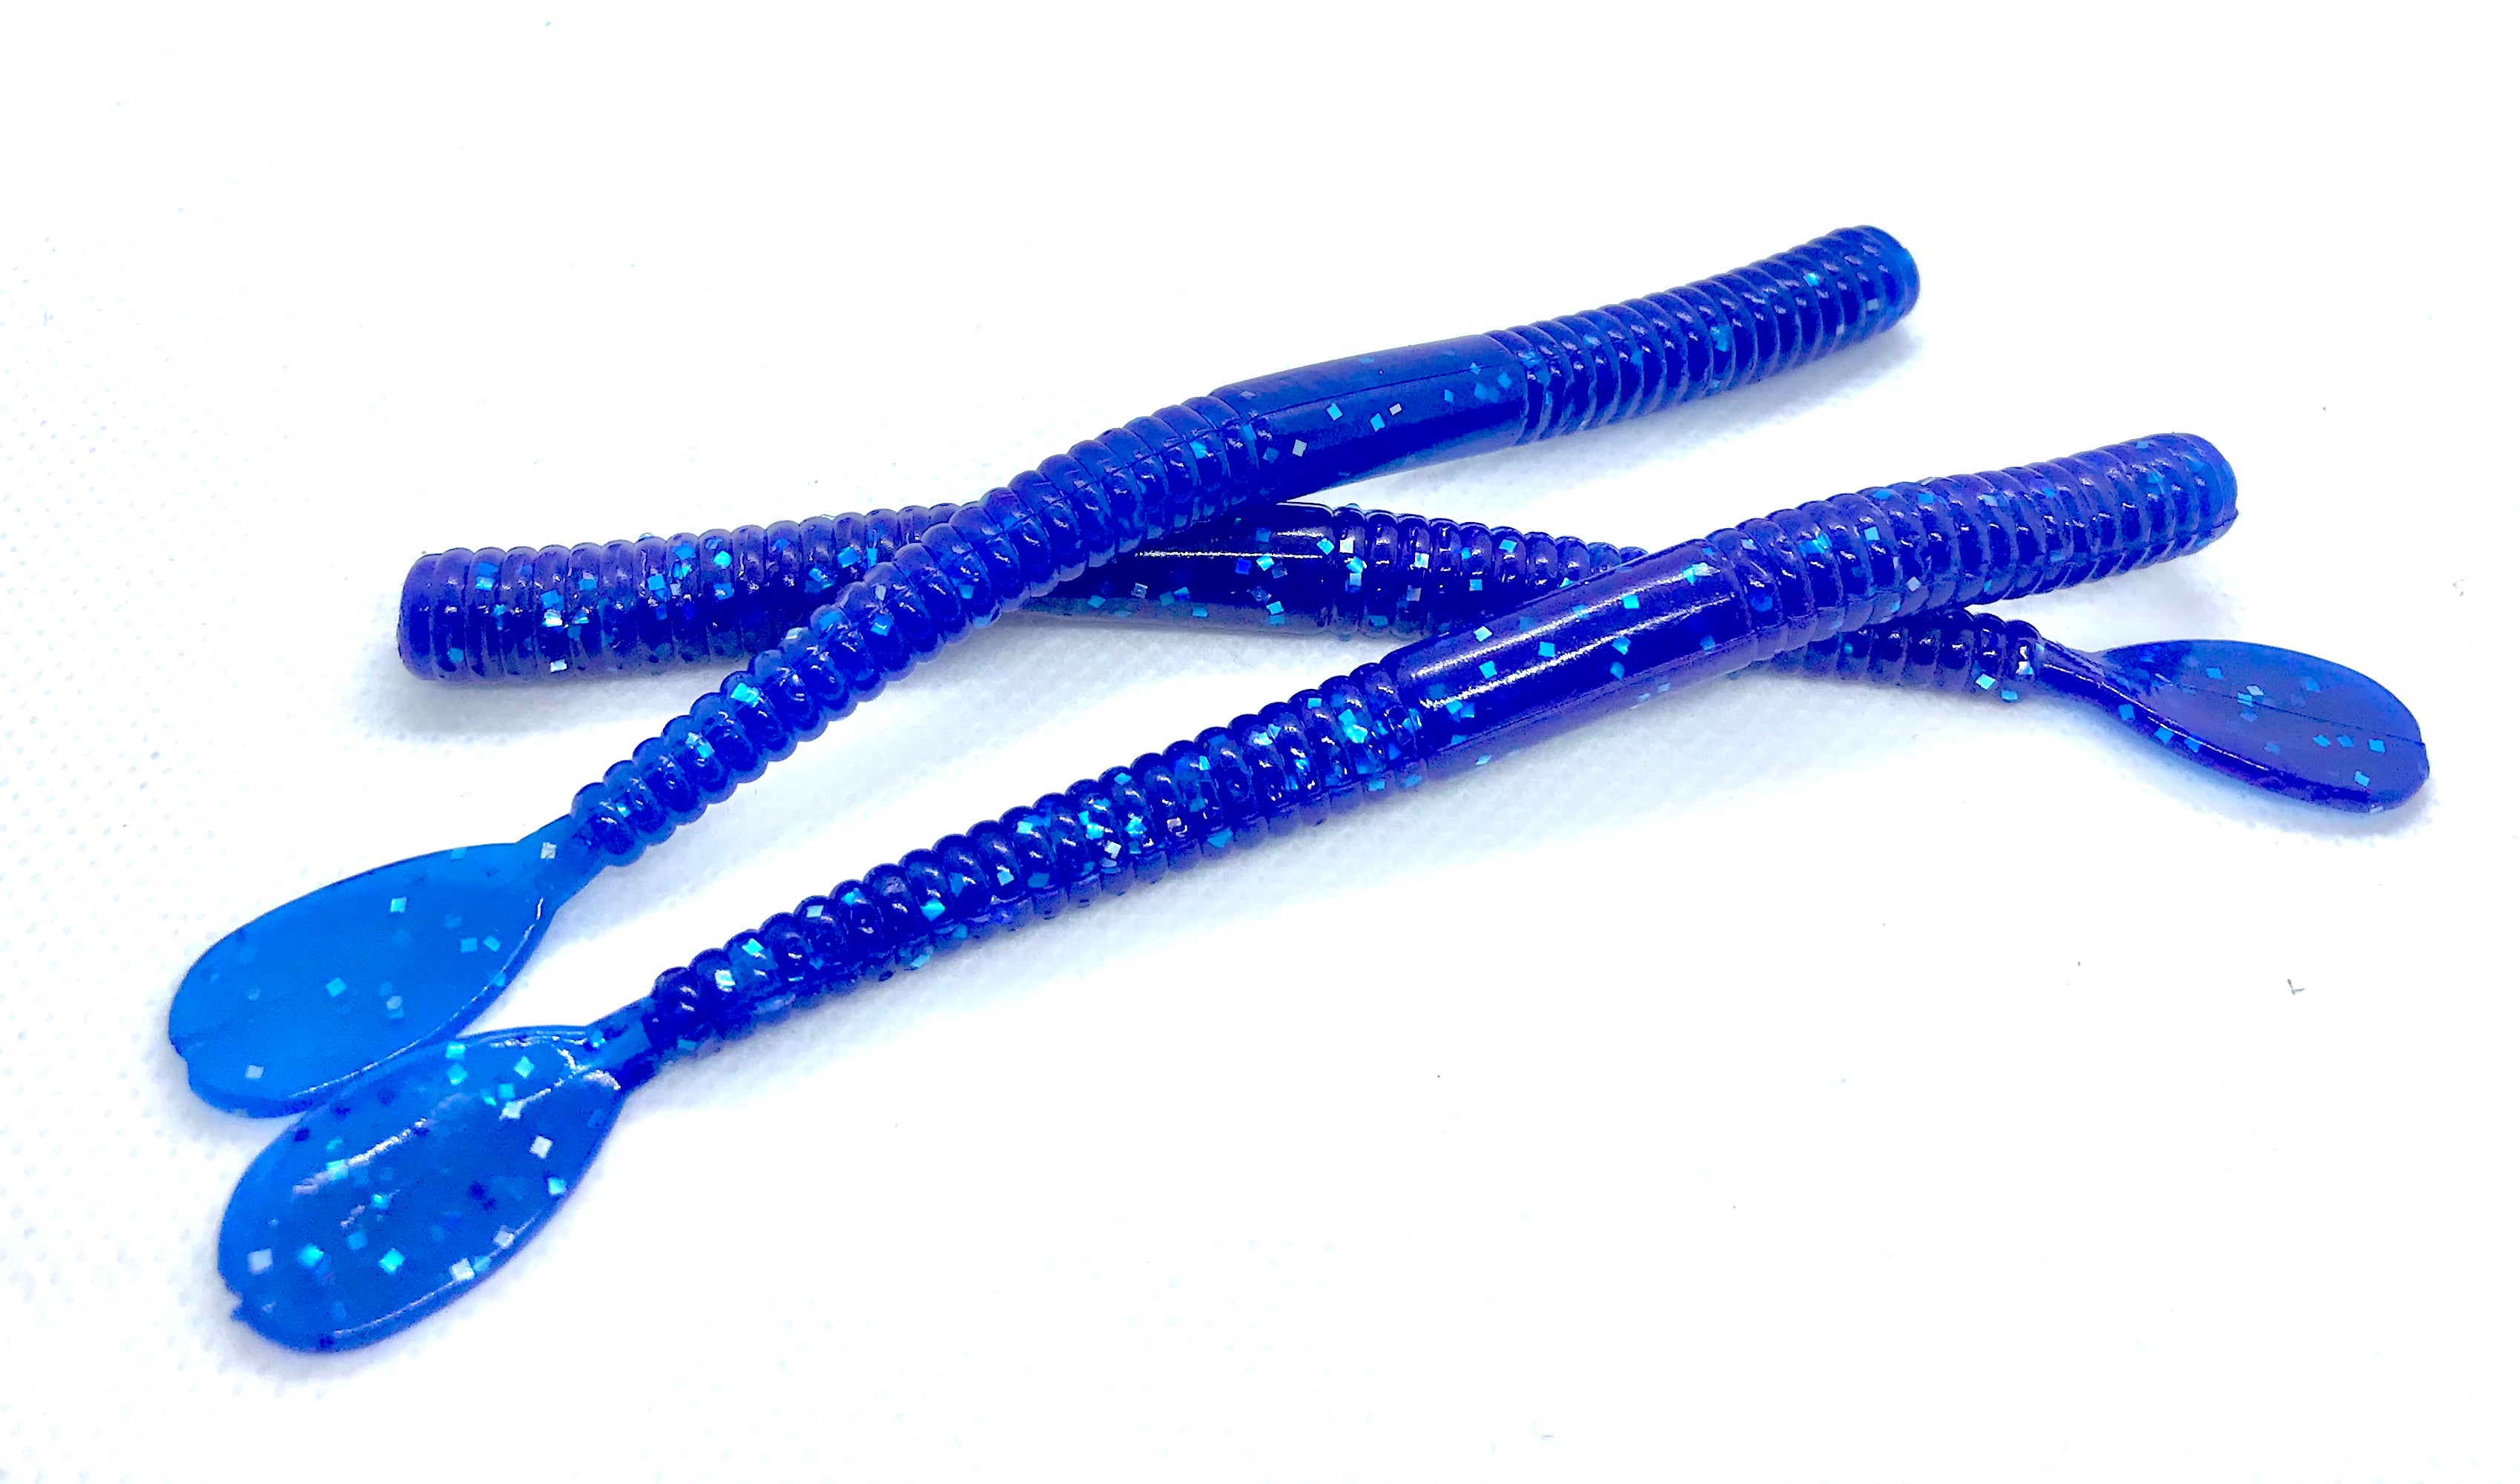 BnR Tackle Holey Worms Steelhead Soft Plastic Worms 8 Pack True Blue / 5 inch